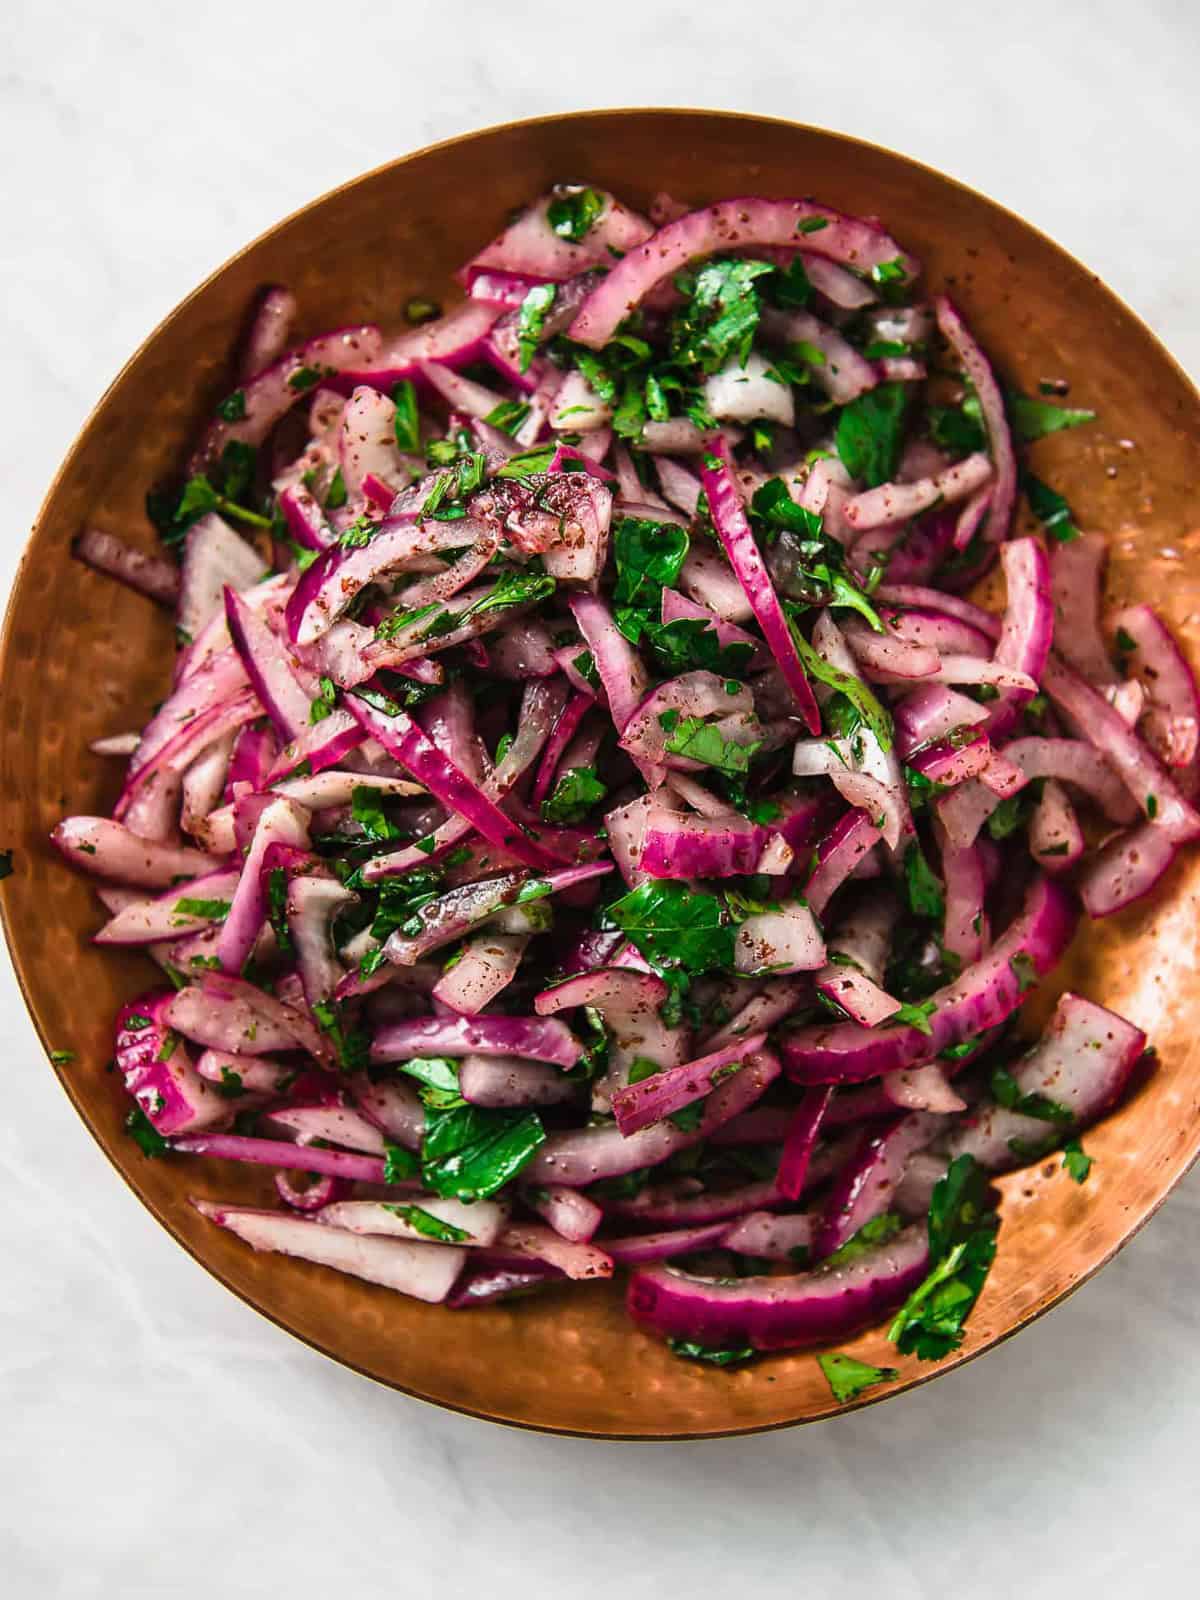 Turkish sumac onion salad has thinly sliced red onions tossed with bright sumac, fresh parsley and fresh lemon juice.